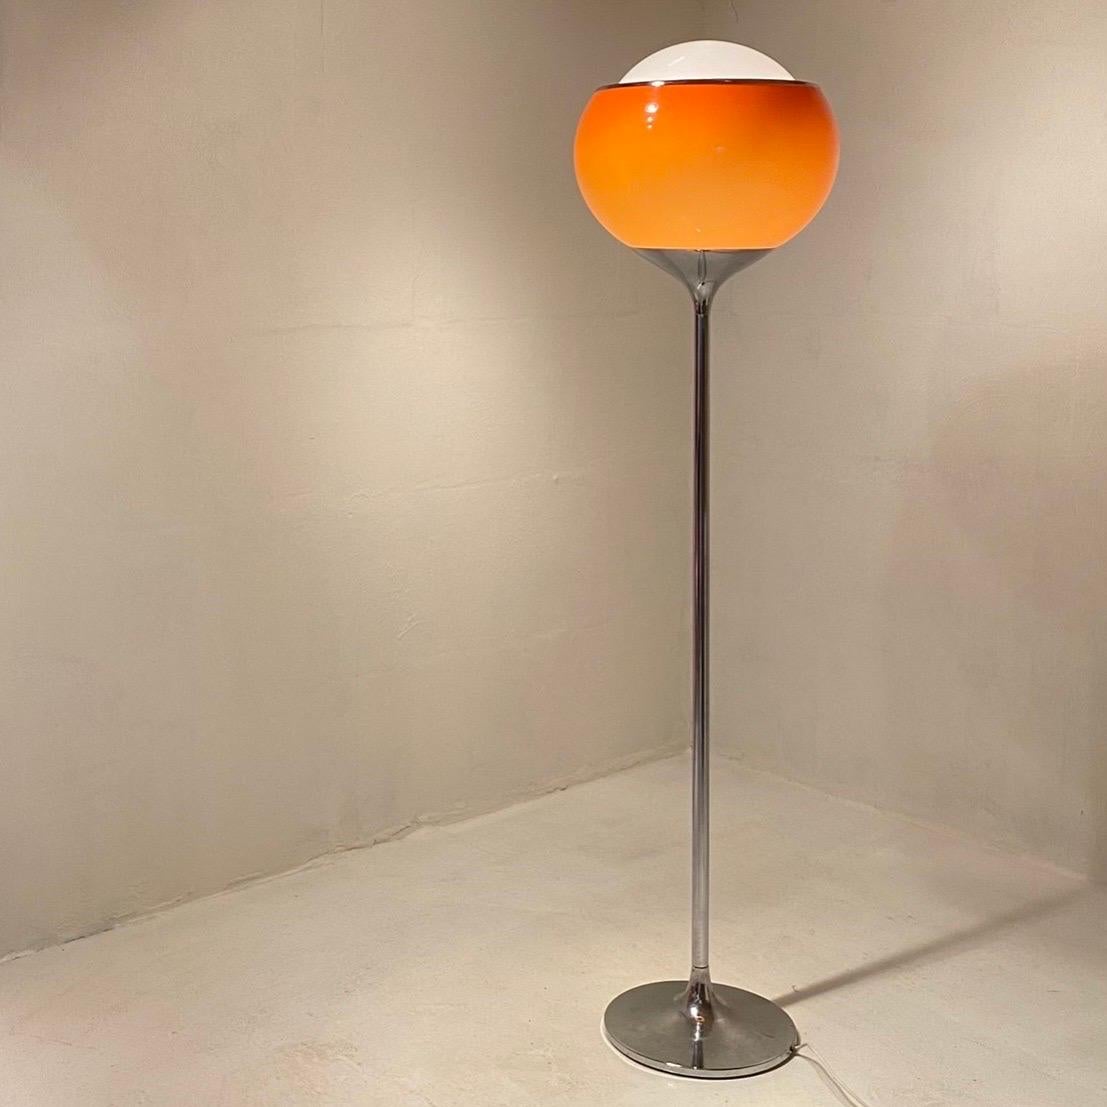 Been hunting a Big Bud floor lamp for years and here it is. 

Made by Guzzini, Italy 1970s. 

Chrome, orange and white plastic that without doubt is an eye catcher lit or unlit. 

Very good vintage condition. 

Due to the large size the lamp